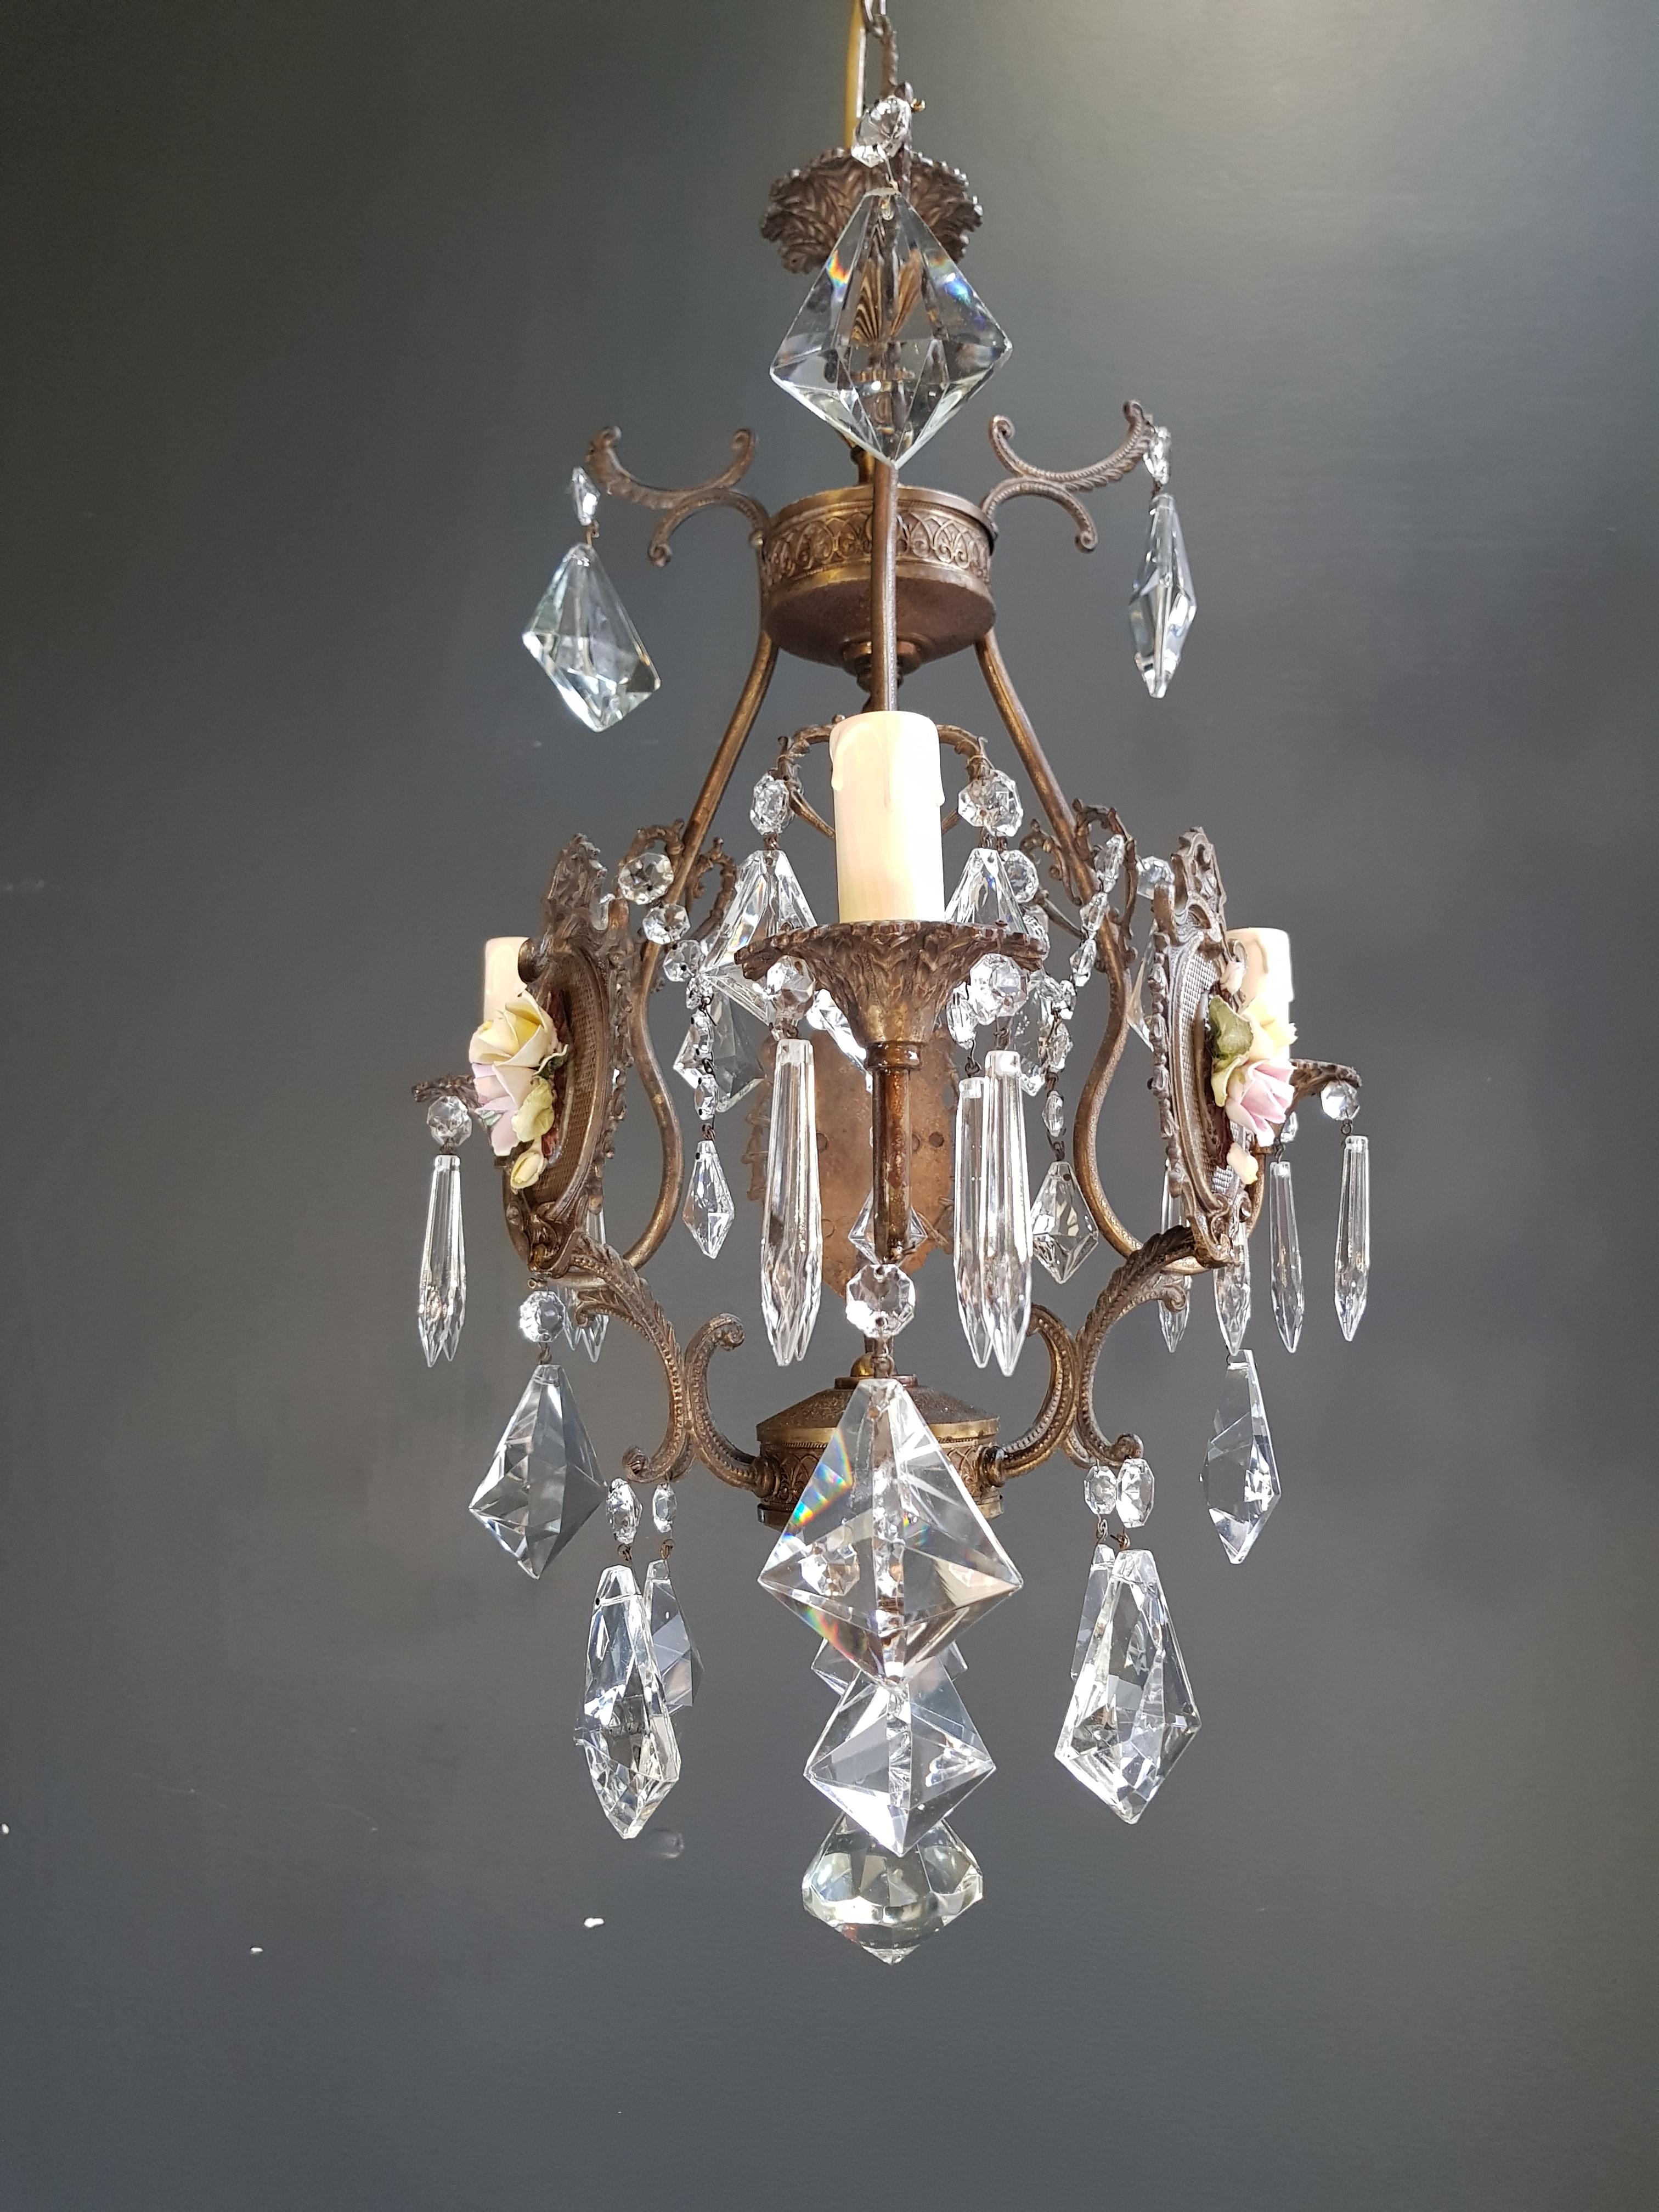 Elegant Porcelain Cage Yellow Pink Crystal Chandelier - Antique Ceiling Lamp Lustre

Presenting an exquisite porcelain cage chandelier adorned with delicate yellow and pink crystals, a true antique treasure that infuses elegance into any space. This